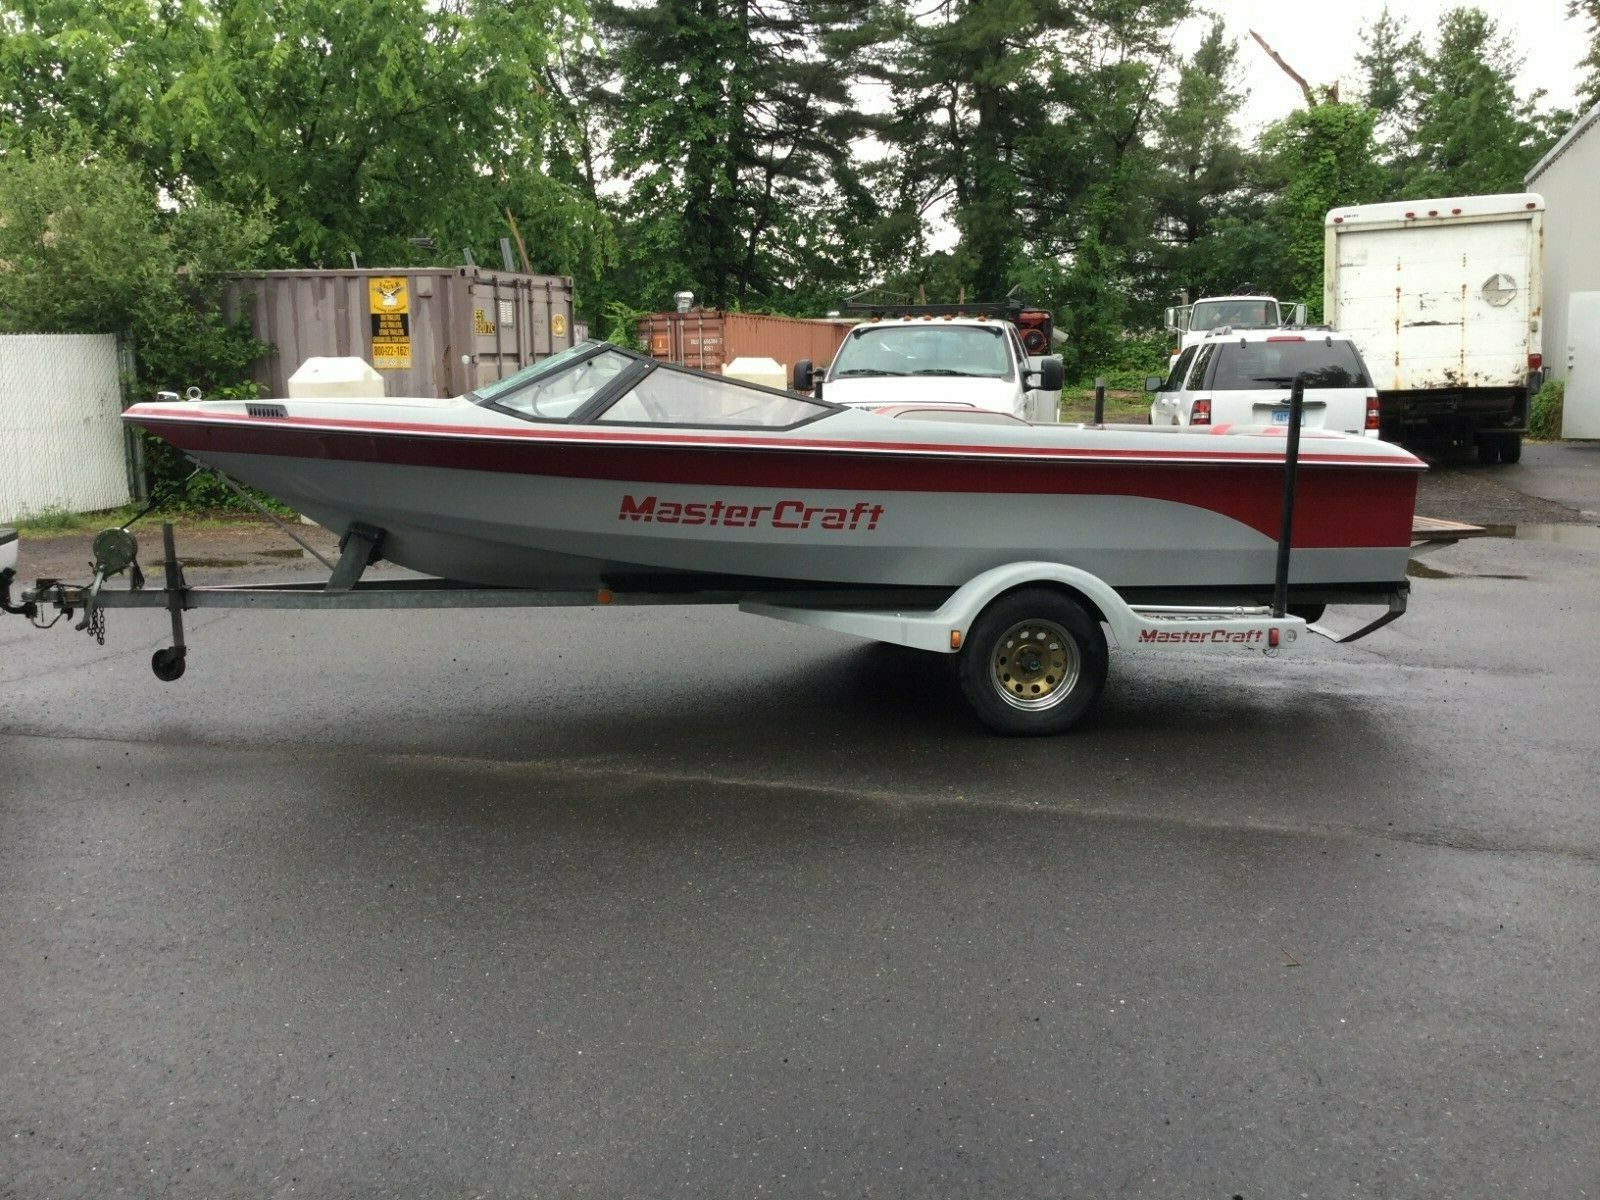 Mastercraft 1997 for sale for $3,950 - Boats-from-USA.com